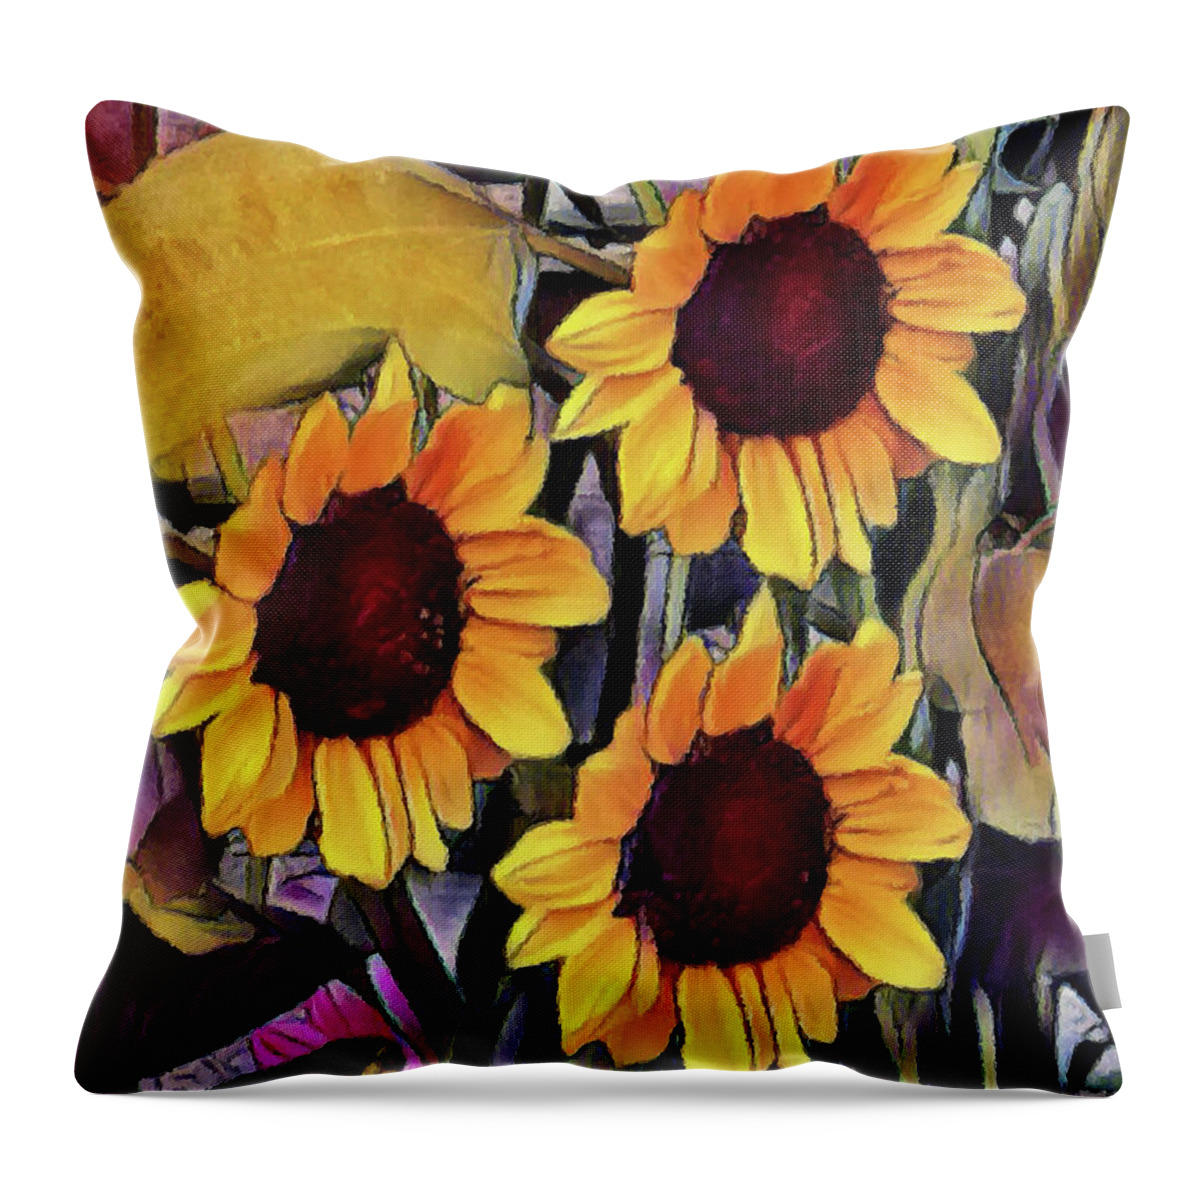 Sunflowers Throw Pillow featuring the photograph Sunflowers by Yvonne Johnstone